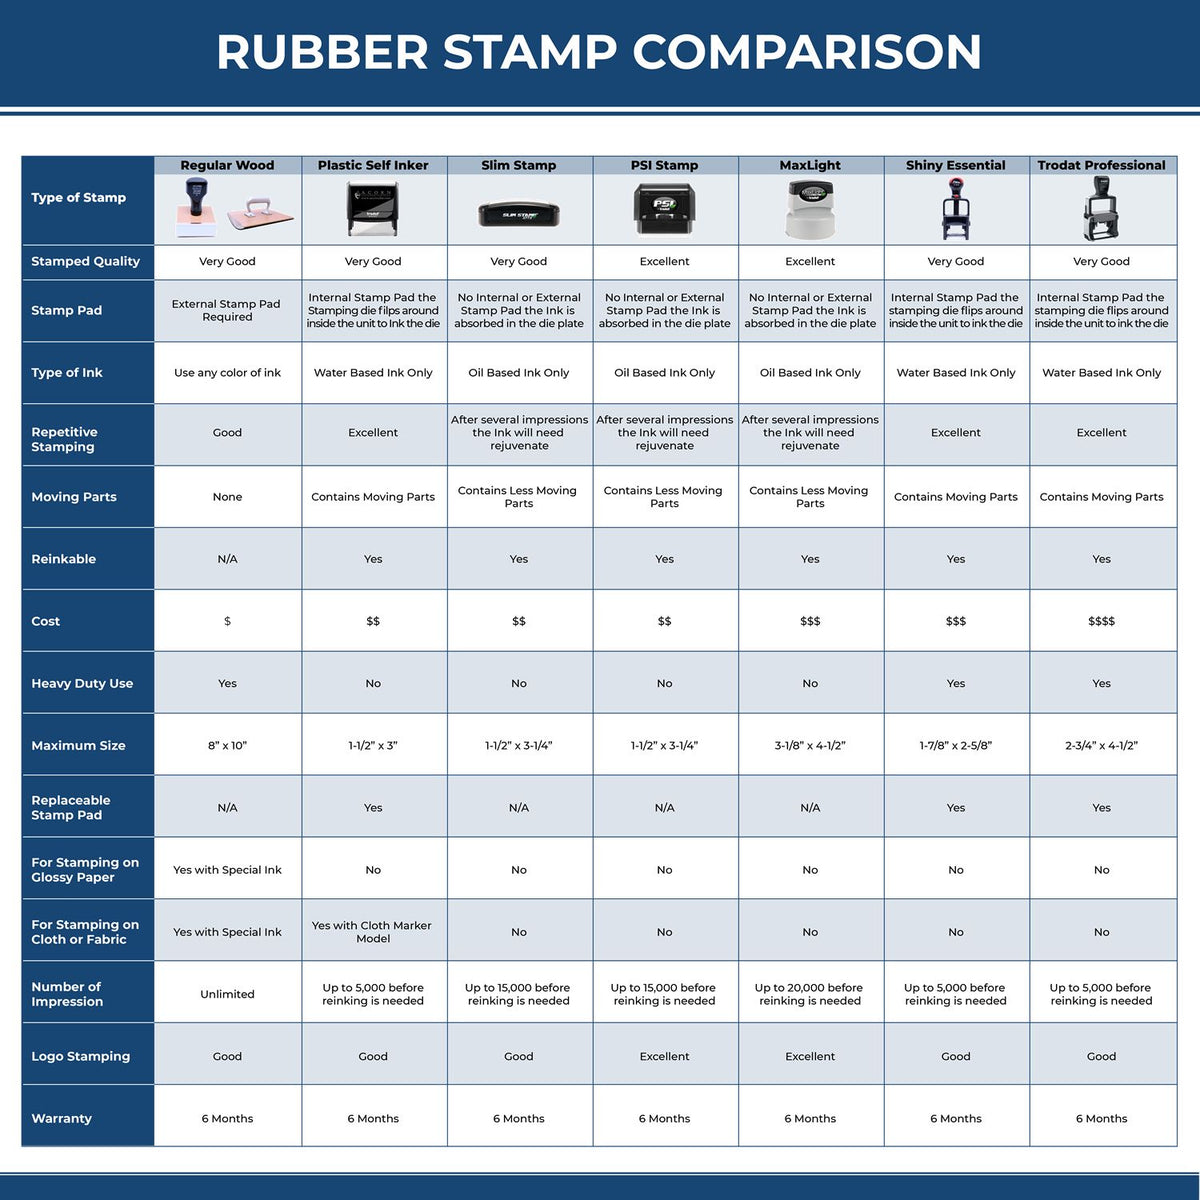 A comparison chart for the different types of mount models available for the Premium MaxLight Pre-Inked Rhode Is Landscape Architects Stamp.